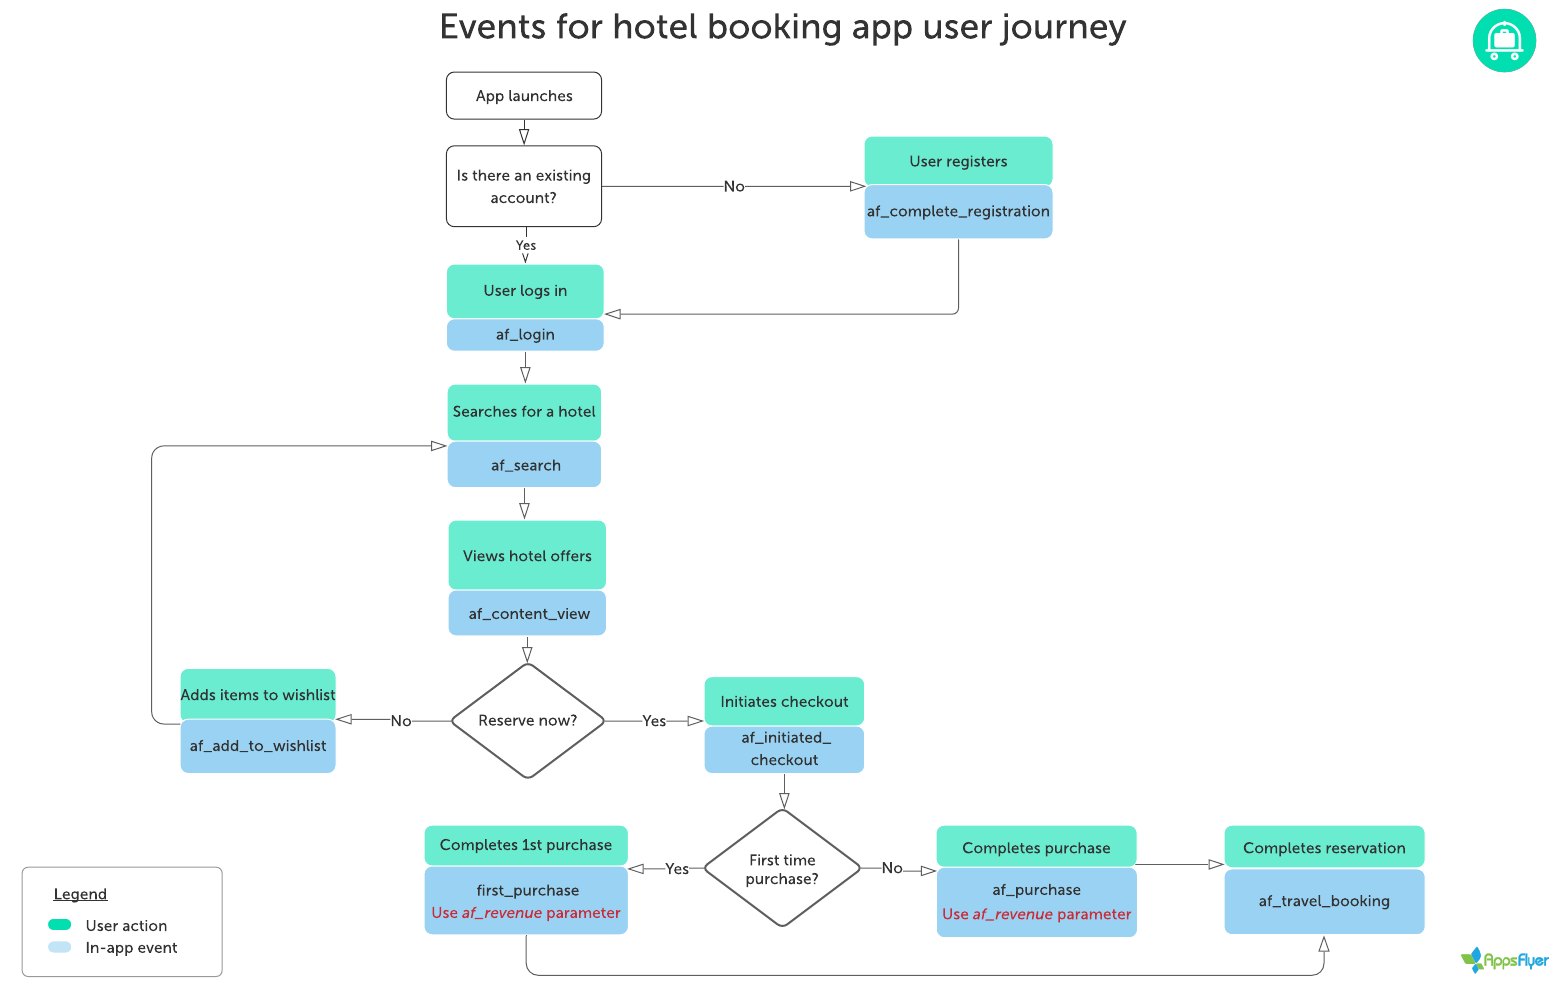 Flowchart_for_recommended_events_hotel_booking_app_user_journey